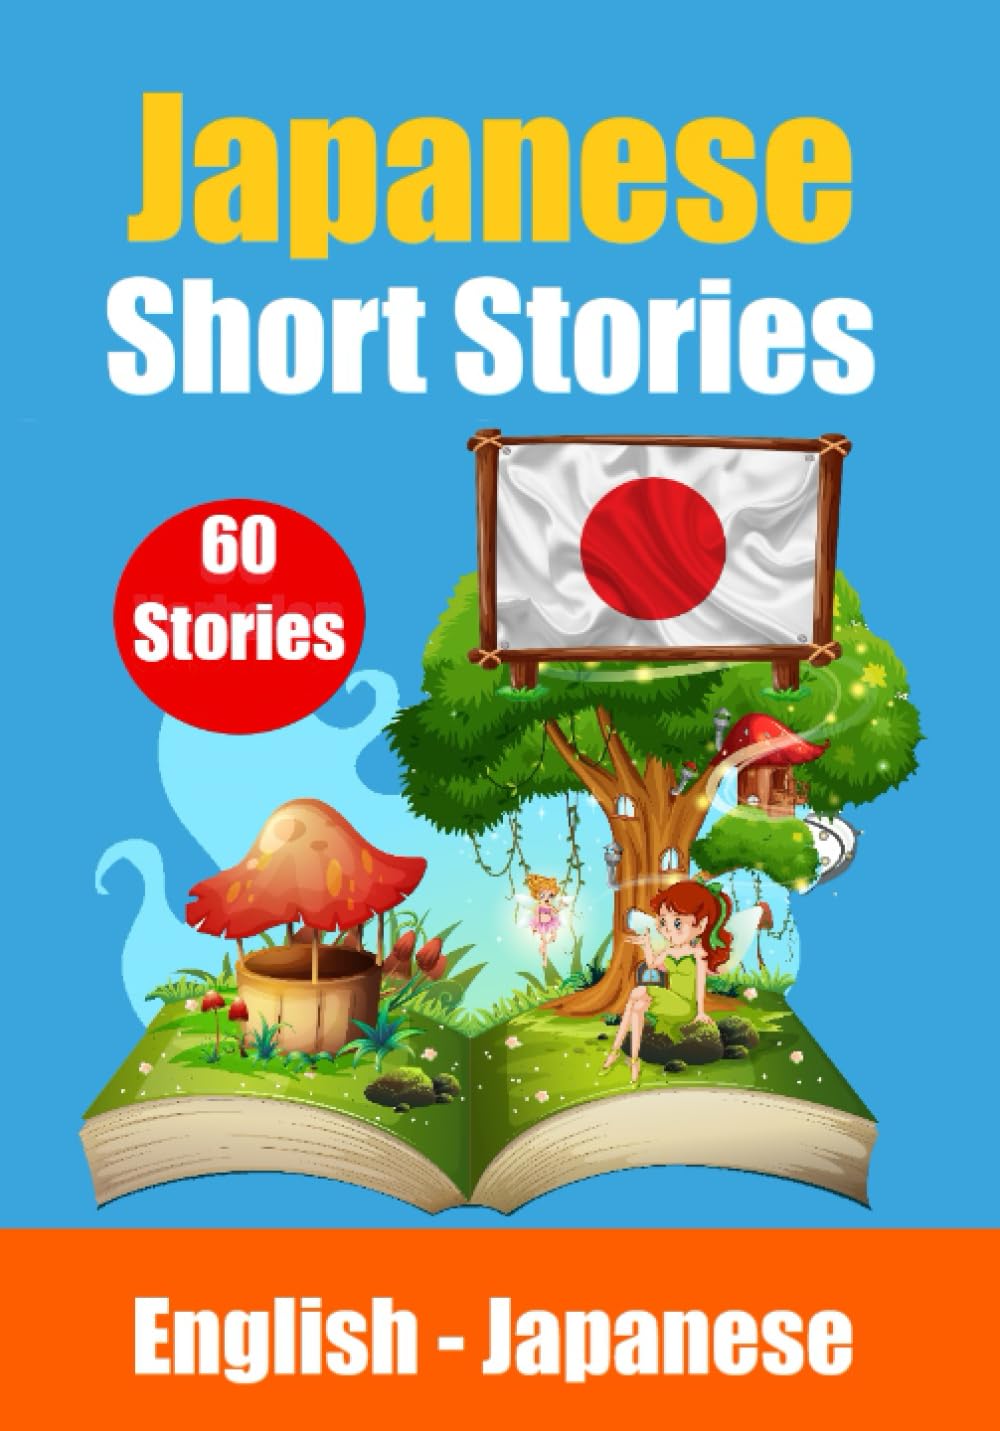 Short Stories in Japanese | English and Japanese Stories Side by Side